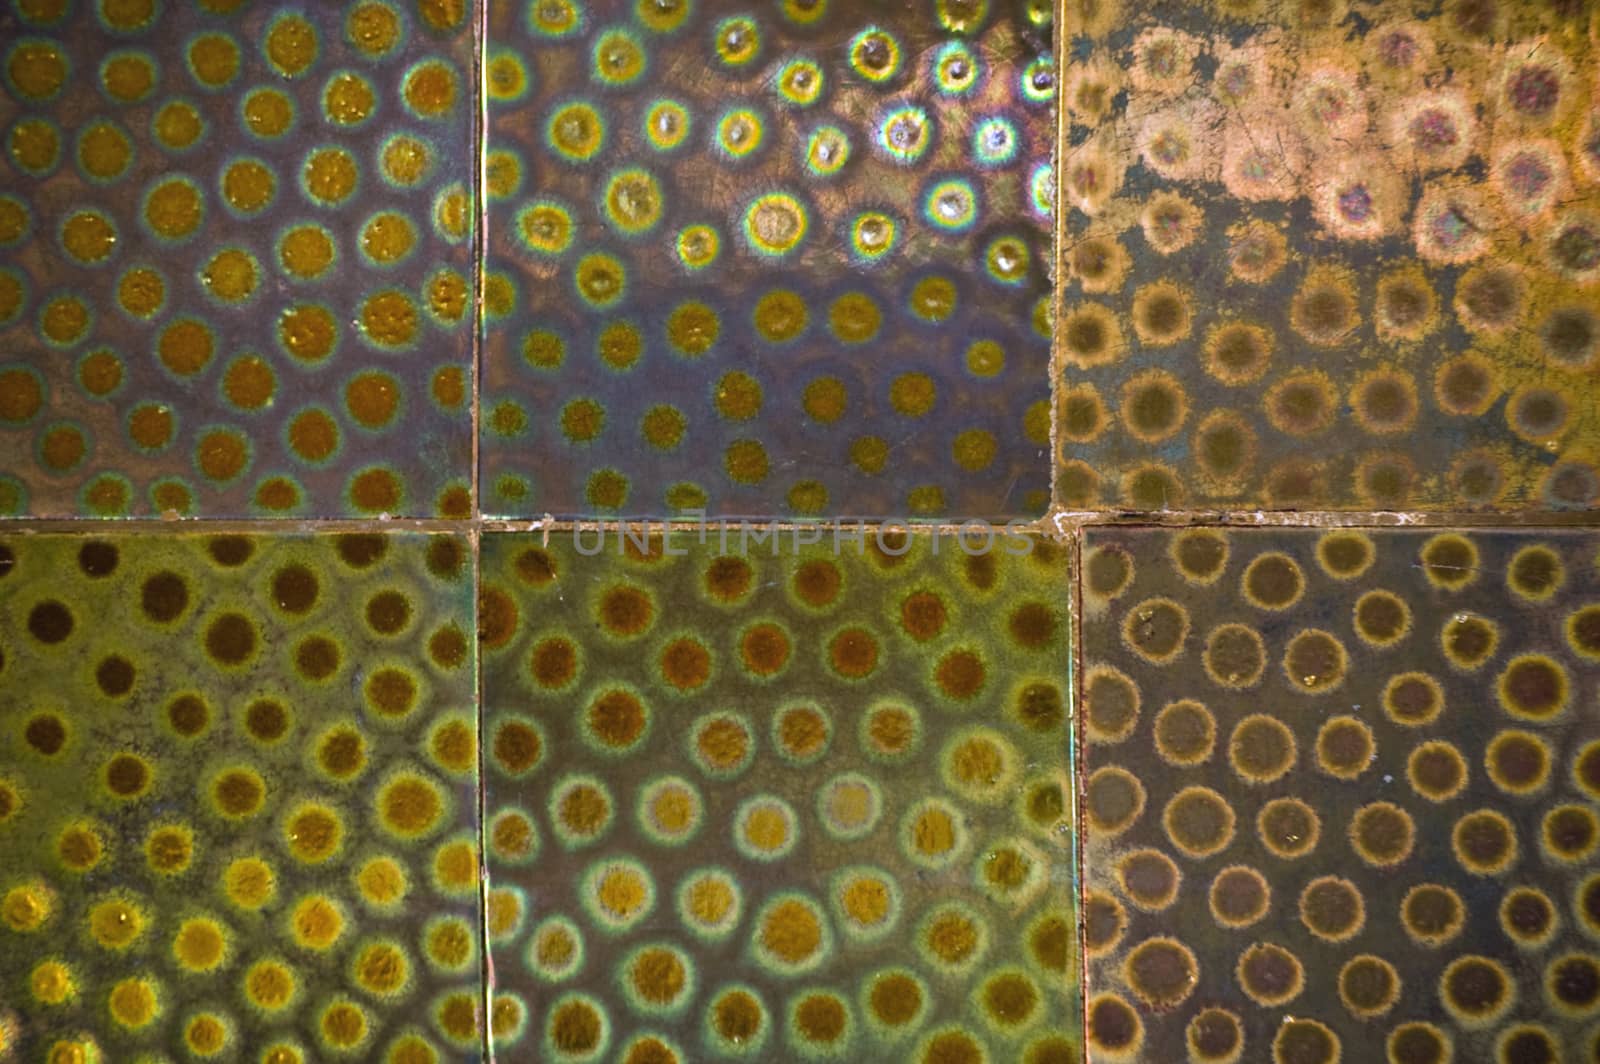 Close up of metallic glazed tiles dating from the art nouveau period and adorning the outside wall of the Hungarian Pavilion in the Giardini, Venice.